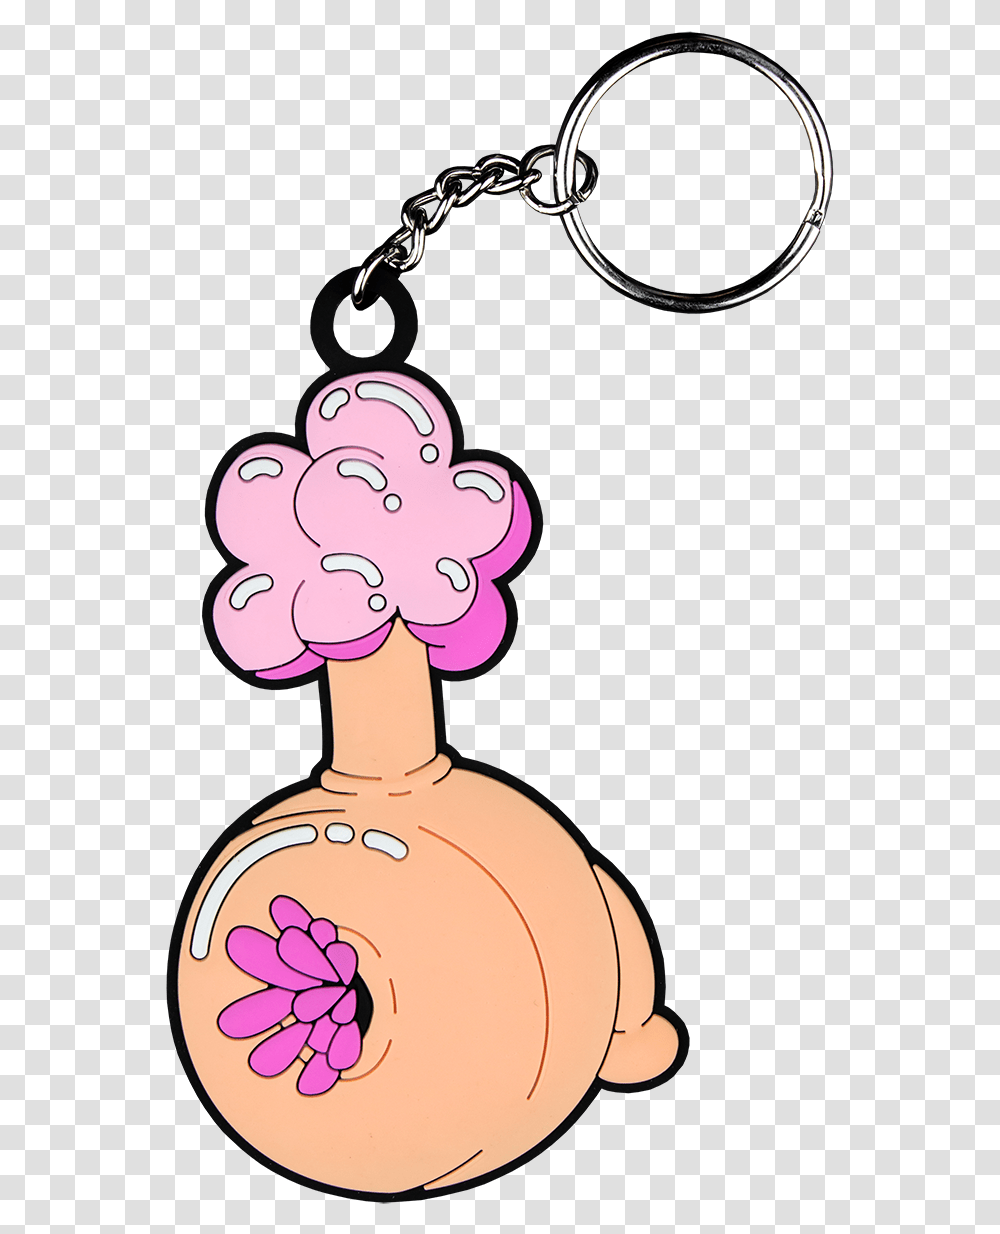 Rick And Morty Plumbus Keychain Rick And Morty Plumbus, Drawing, Doodle, Label Transparent Png